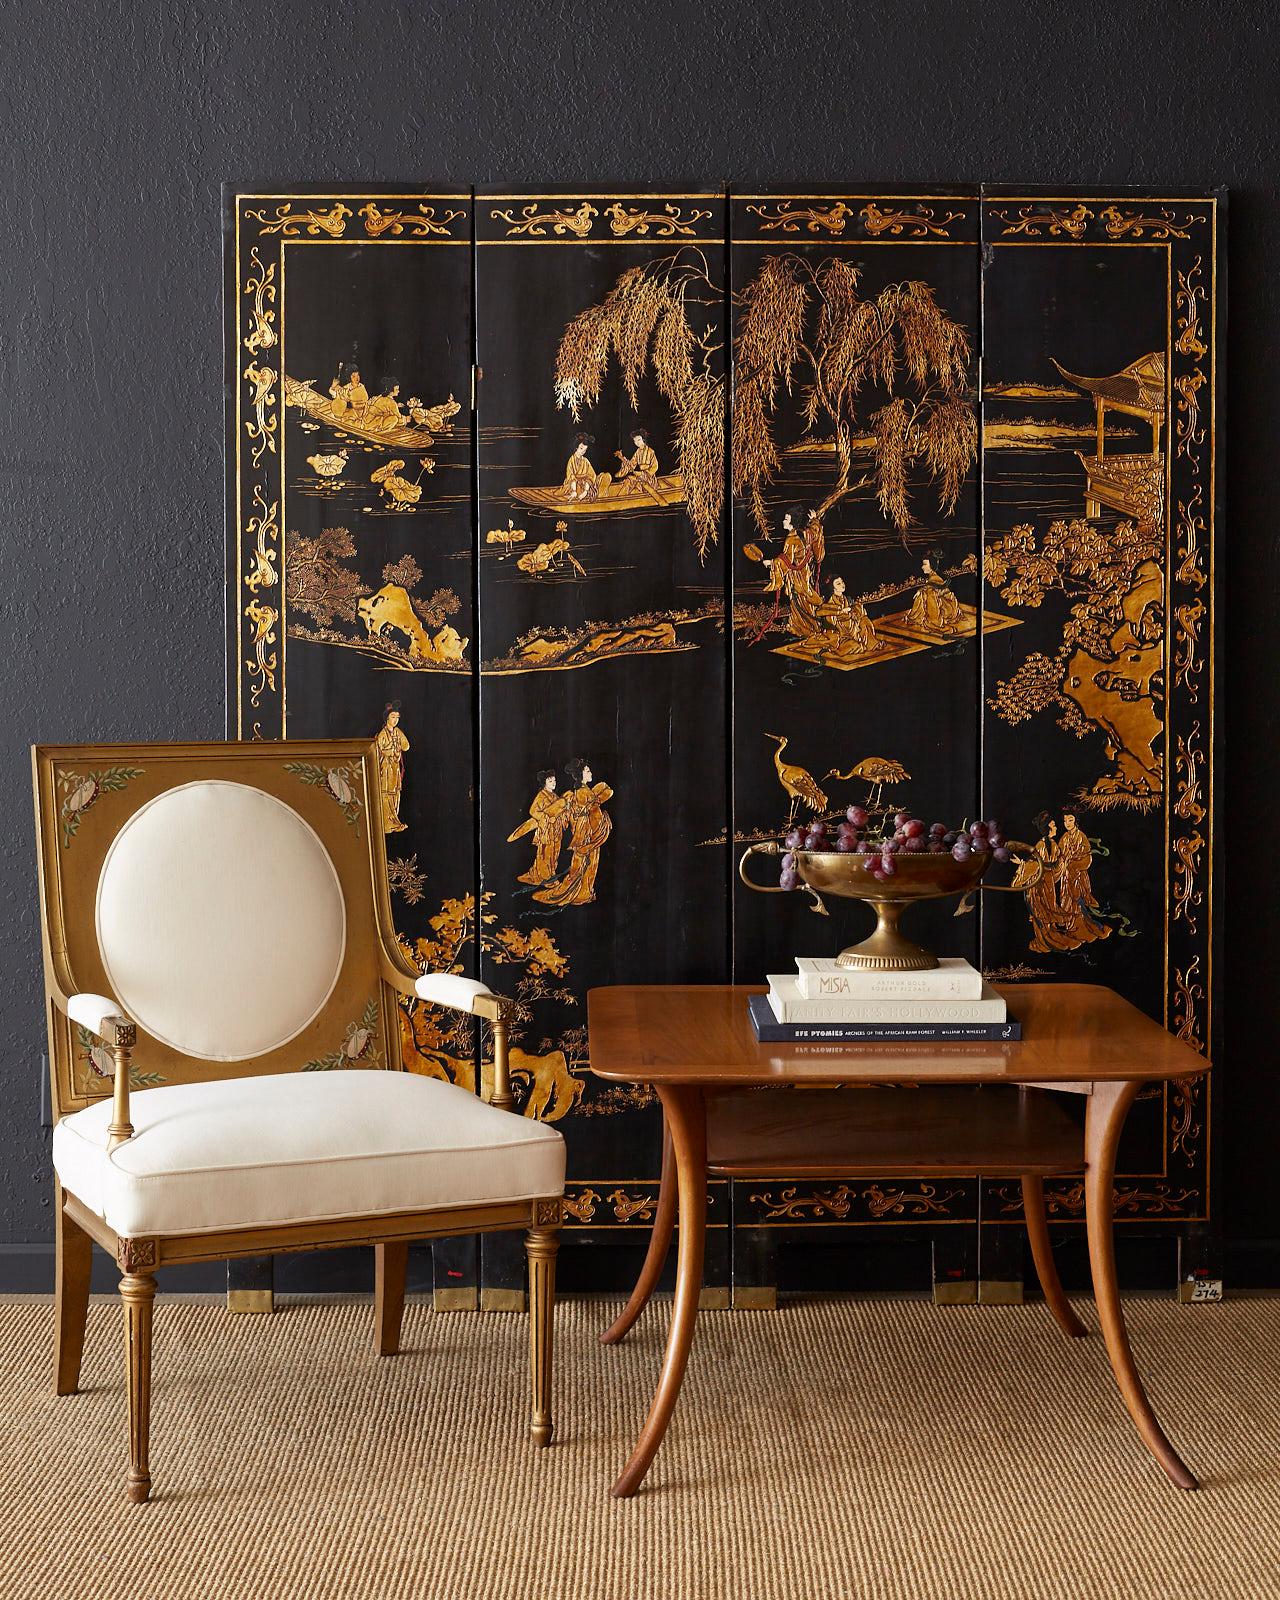 Stunning Chinese export four-panel coromandel screen featuring a black lacquer and gilt finish. The front of the screen depicts elites in an idyllic gilt landscape with trees, boats, and pagodas. The reverse side features Japanese red crowned cranes